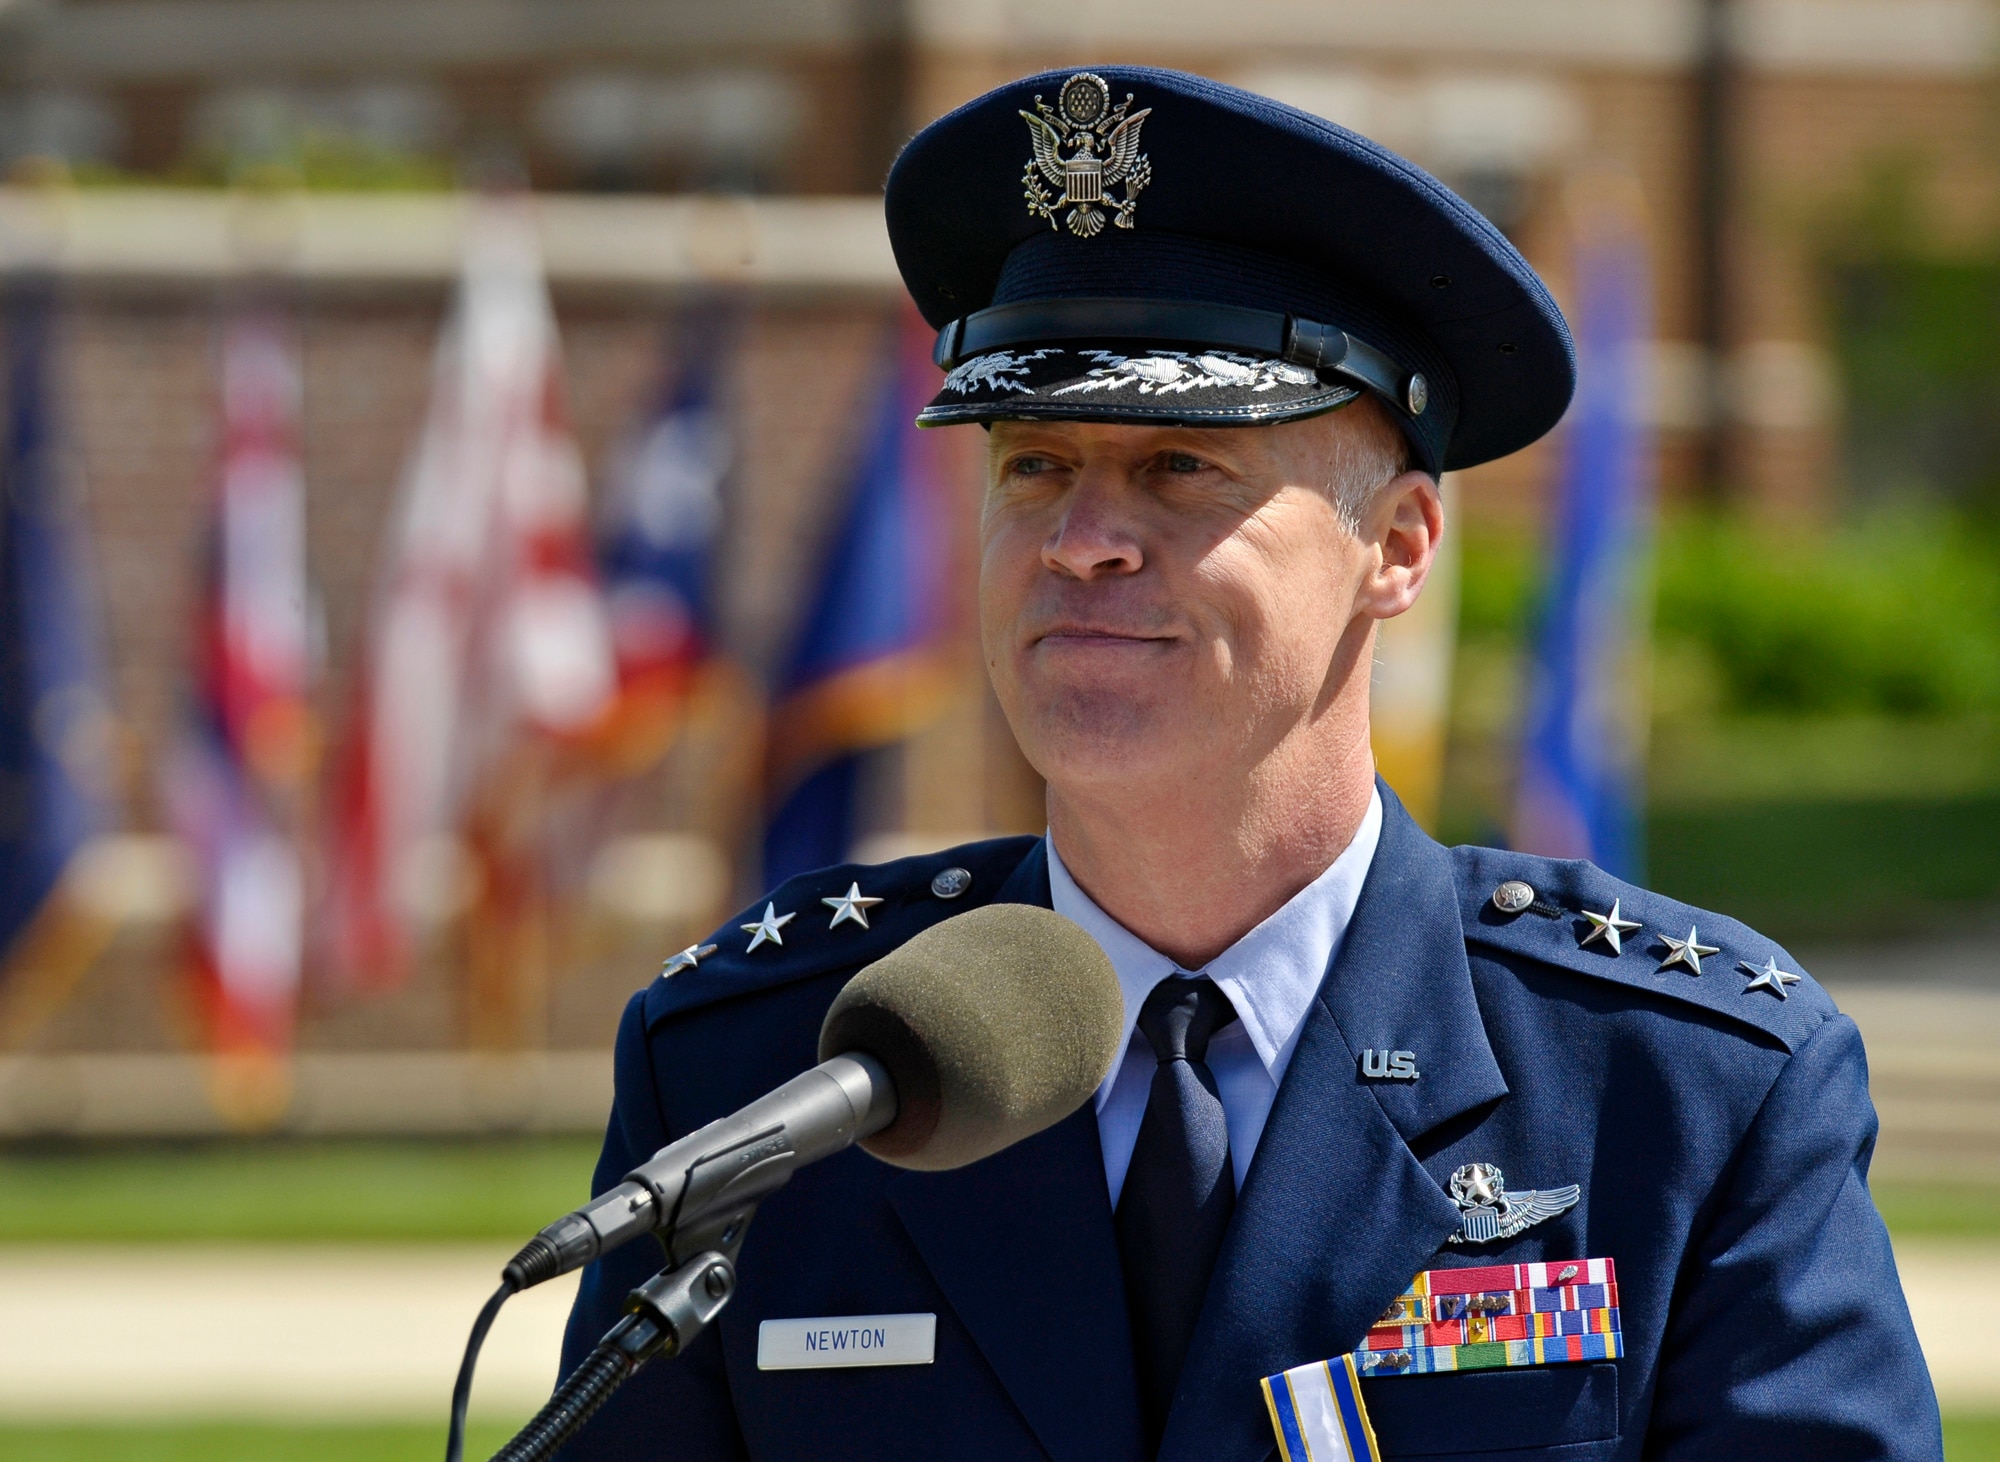 Lt. Gen. Richard Y. Newton III, Assistant Vice Chief of Staff and Director, Air Staff, Headquarters U.S. Air Force, delivers remarks following his retirement ceremony hosted by Air Force Chief of Staff Gen. Norton Schwartz on Joint Base Anacostia-Bolling, D.C., on April 27, 2012.  Newton retires after 34 years of active military service.  (U.S. Air  Force photo/Michael J. Pausic)